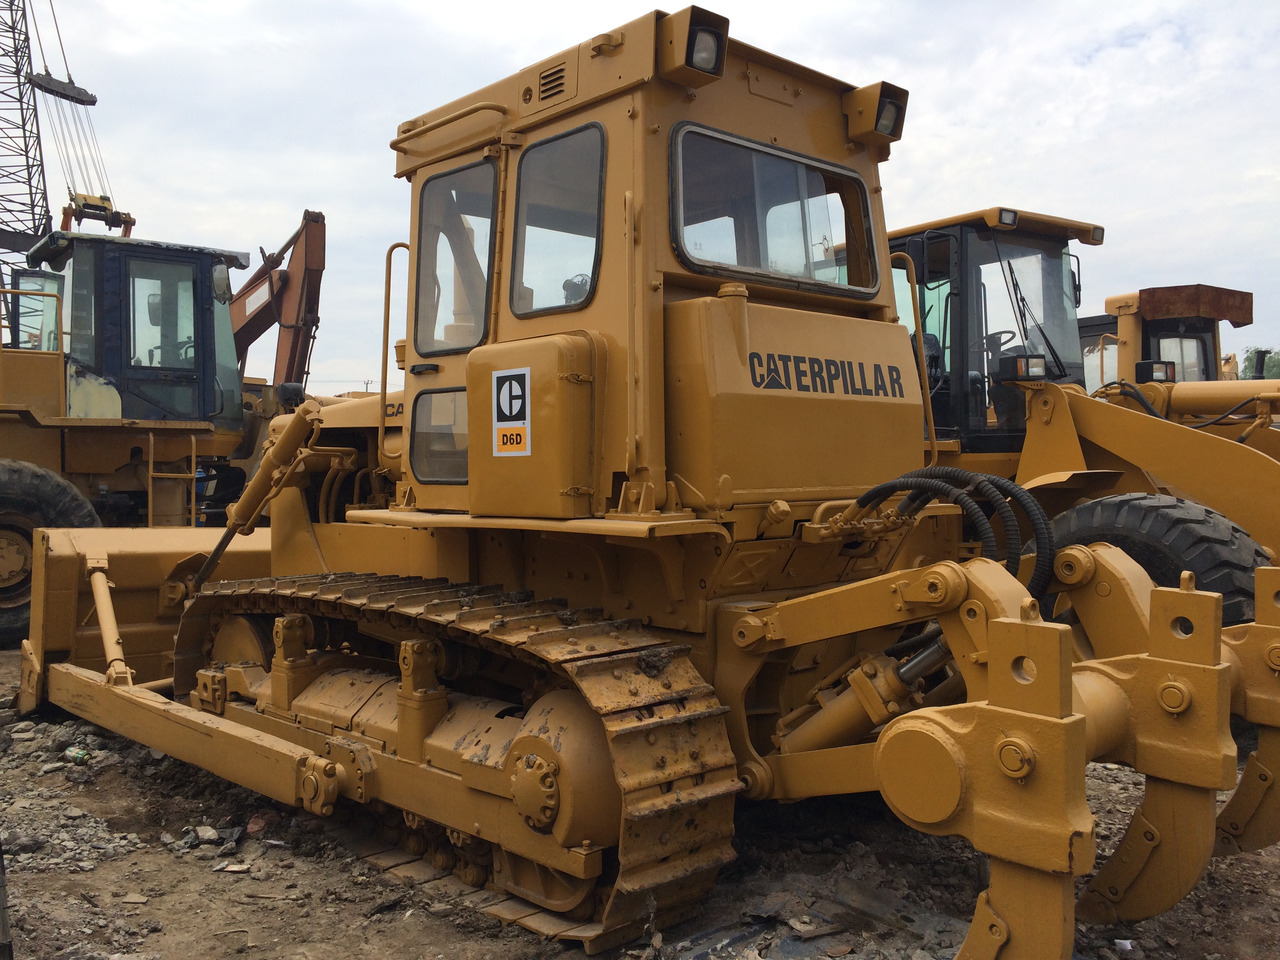 Yeni Buldozer Famous brand CATERPILLAR used D6D in  good condition for sale: fotoğraf 3